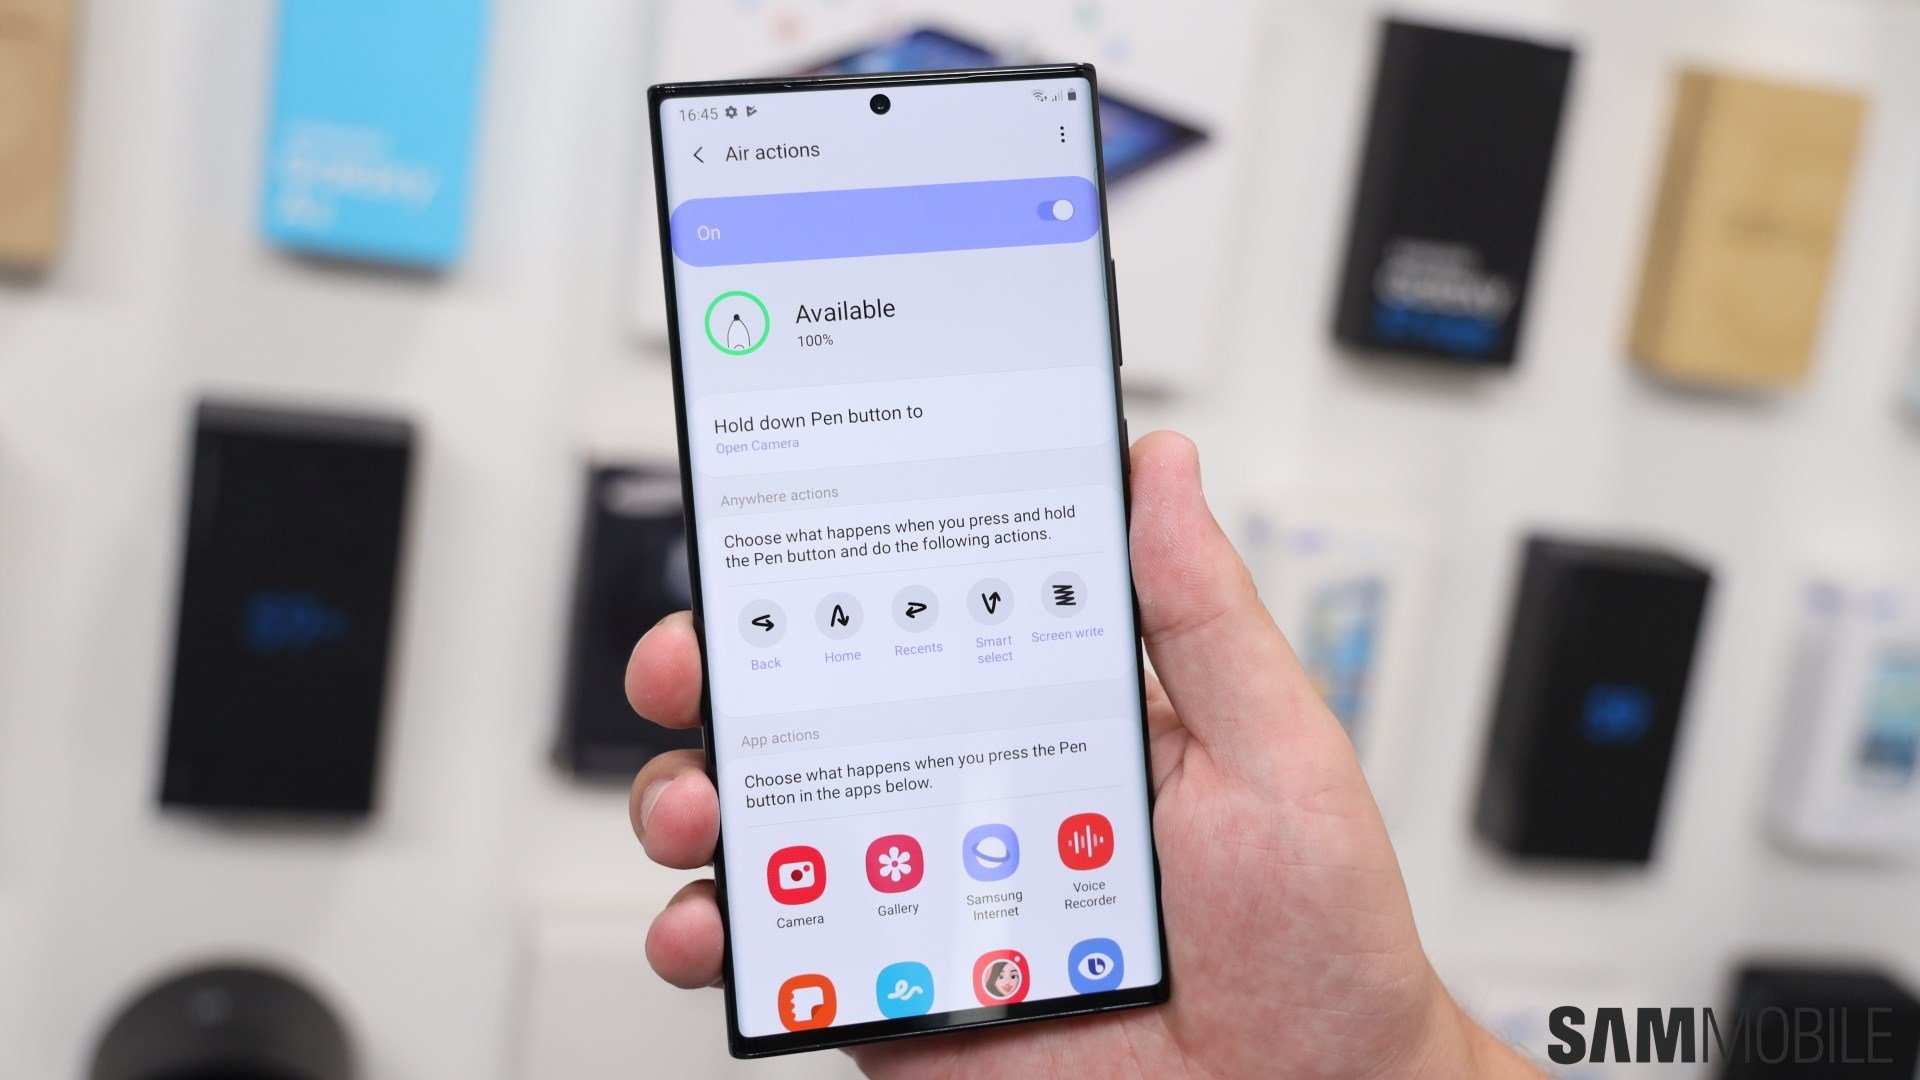 Samsung Devices to Get One UI 3.0 Update